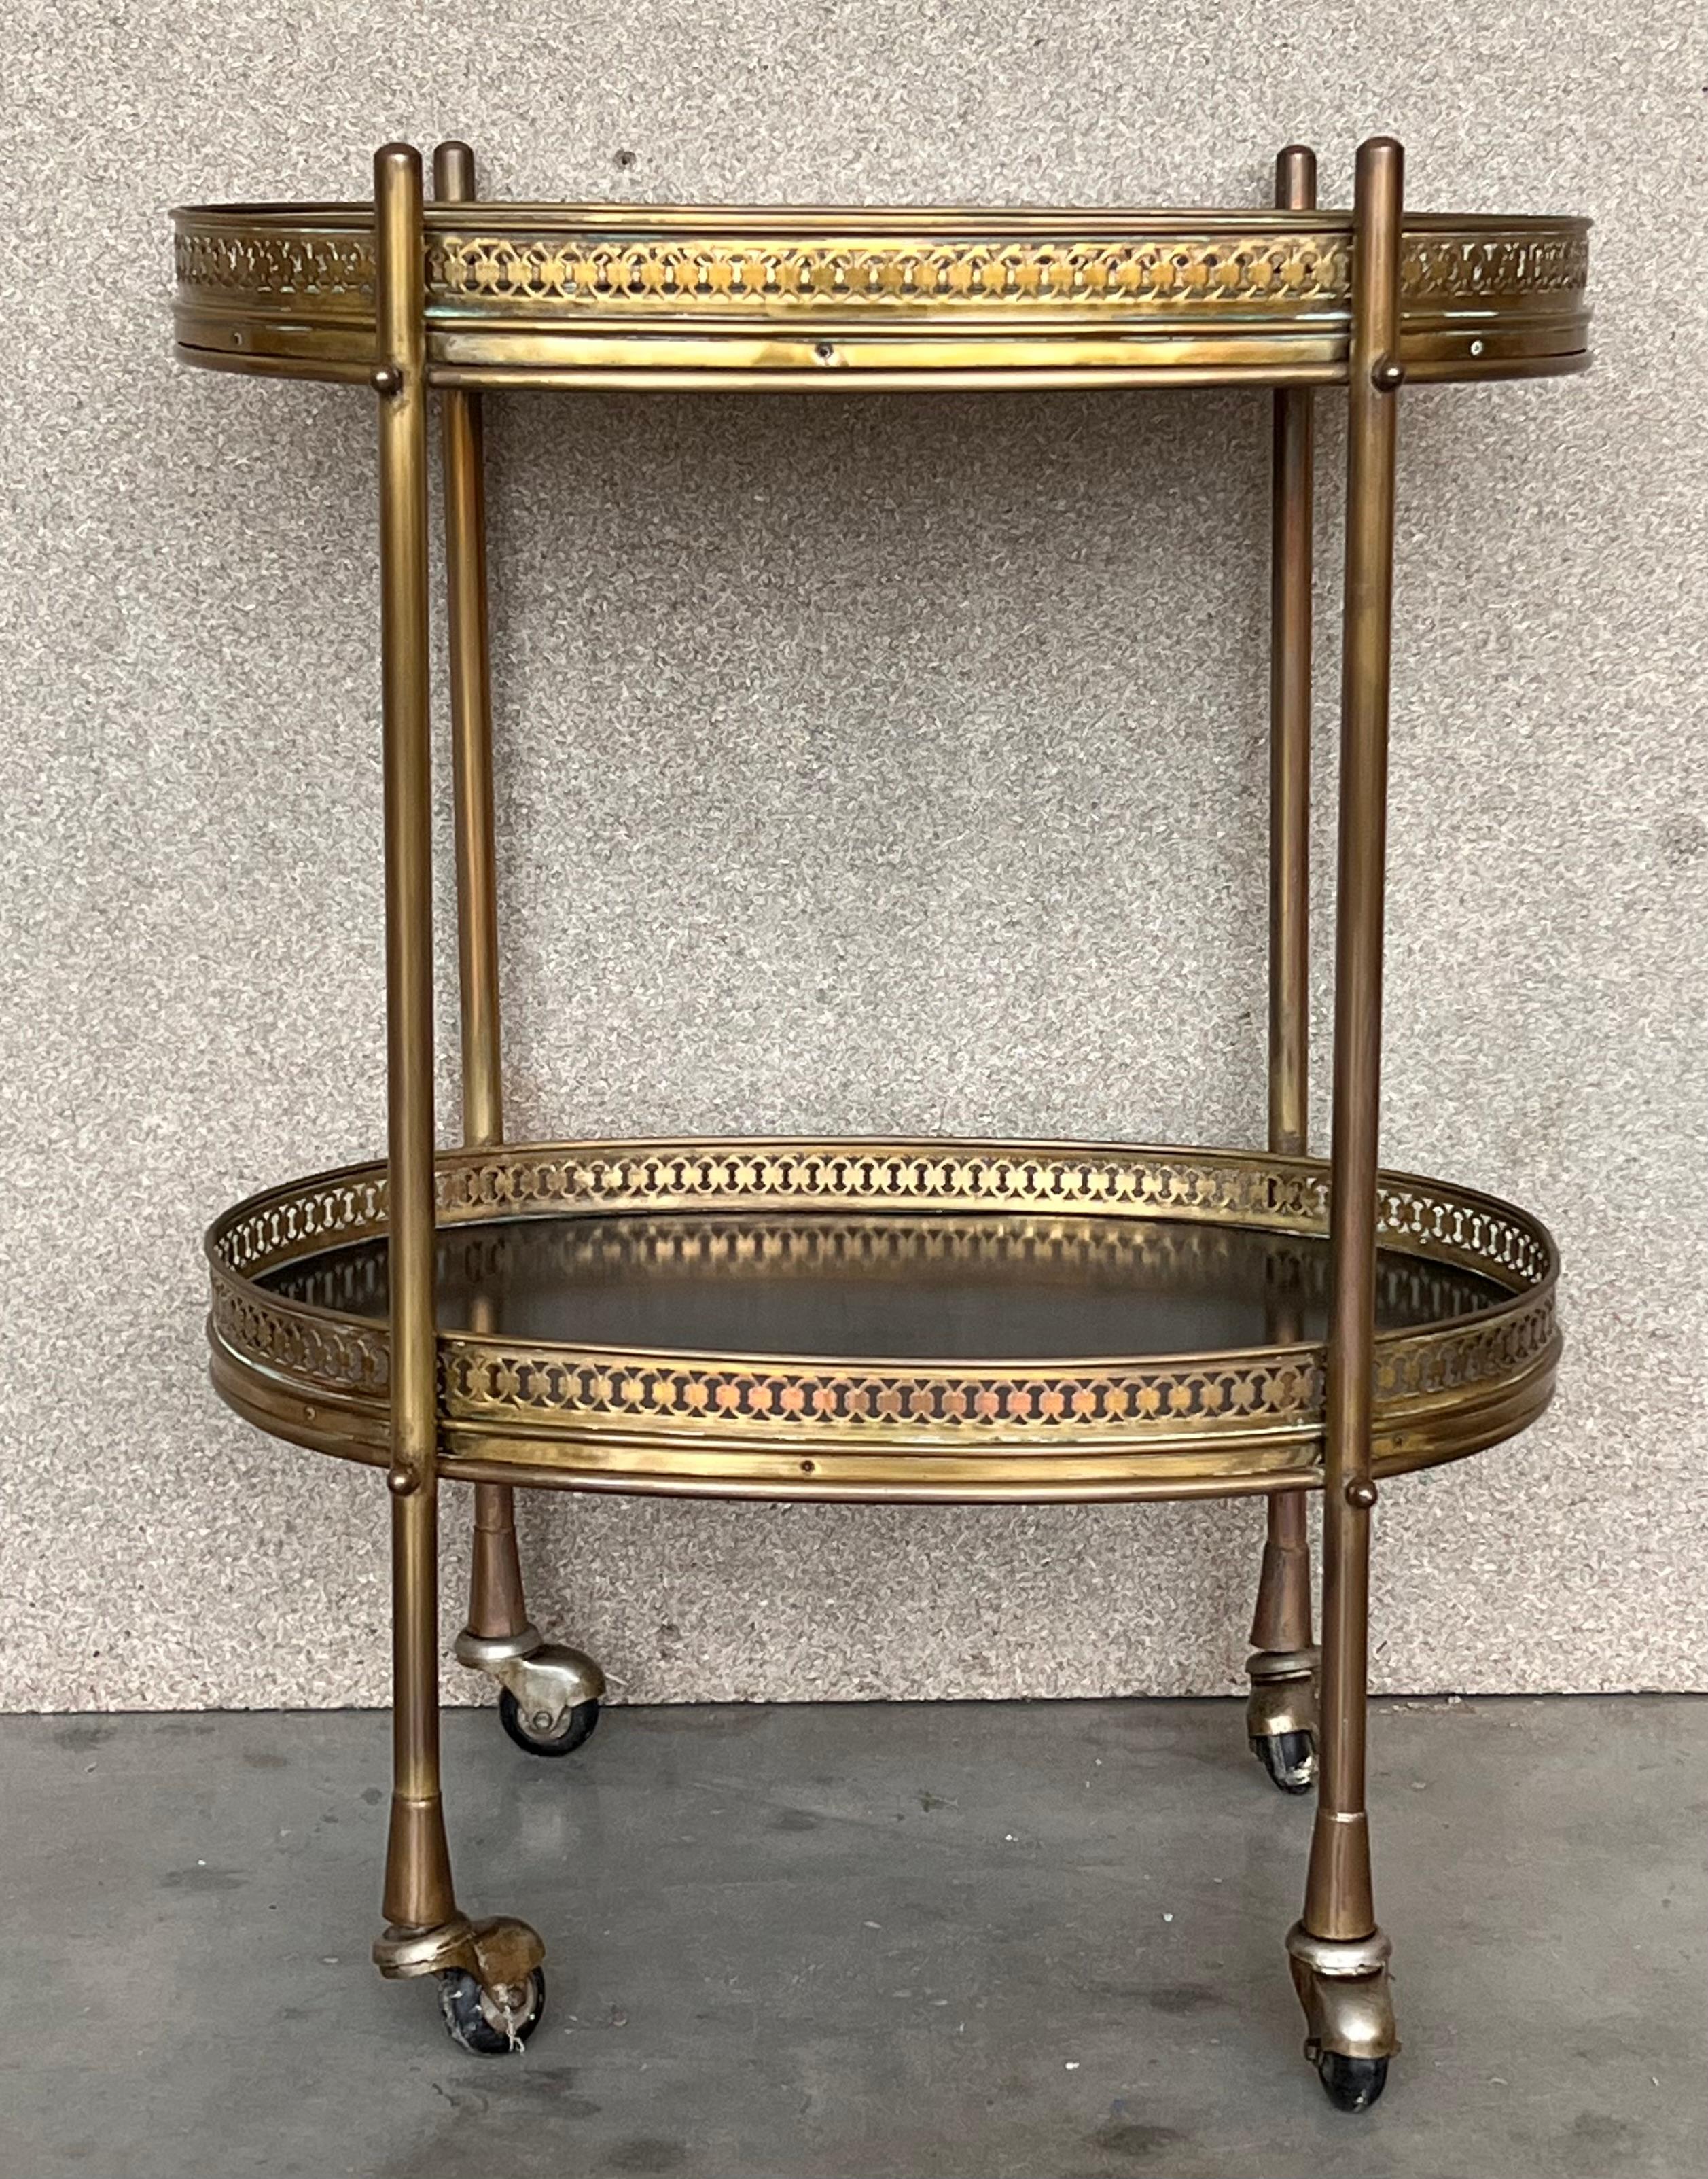 Beautiful Baroque Revival table with removable tray from France, early 19th century, circa 1930-1940. Made of walnut veneer this artfully piece shows great designed legs and comes with a nice highlight - two removable trays tabletop in brass. A hand